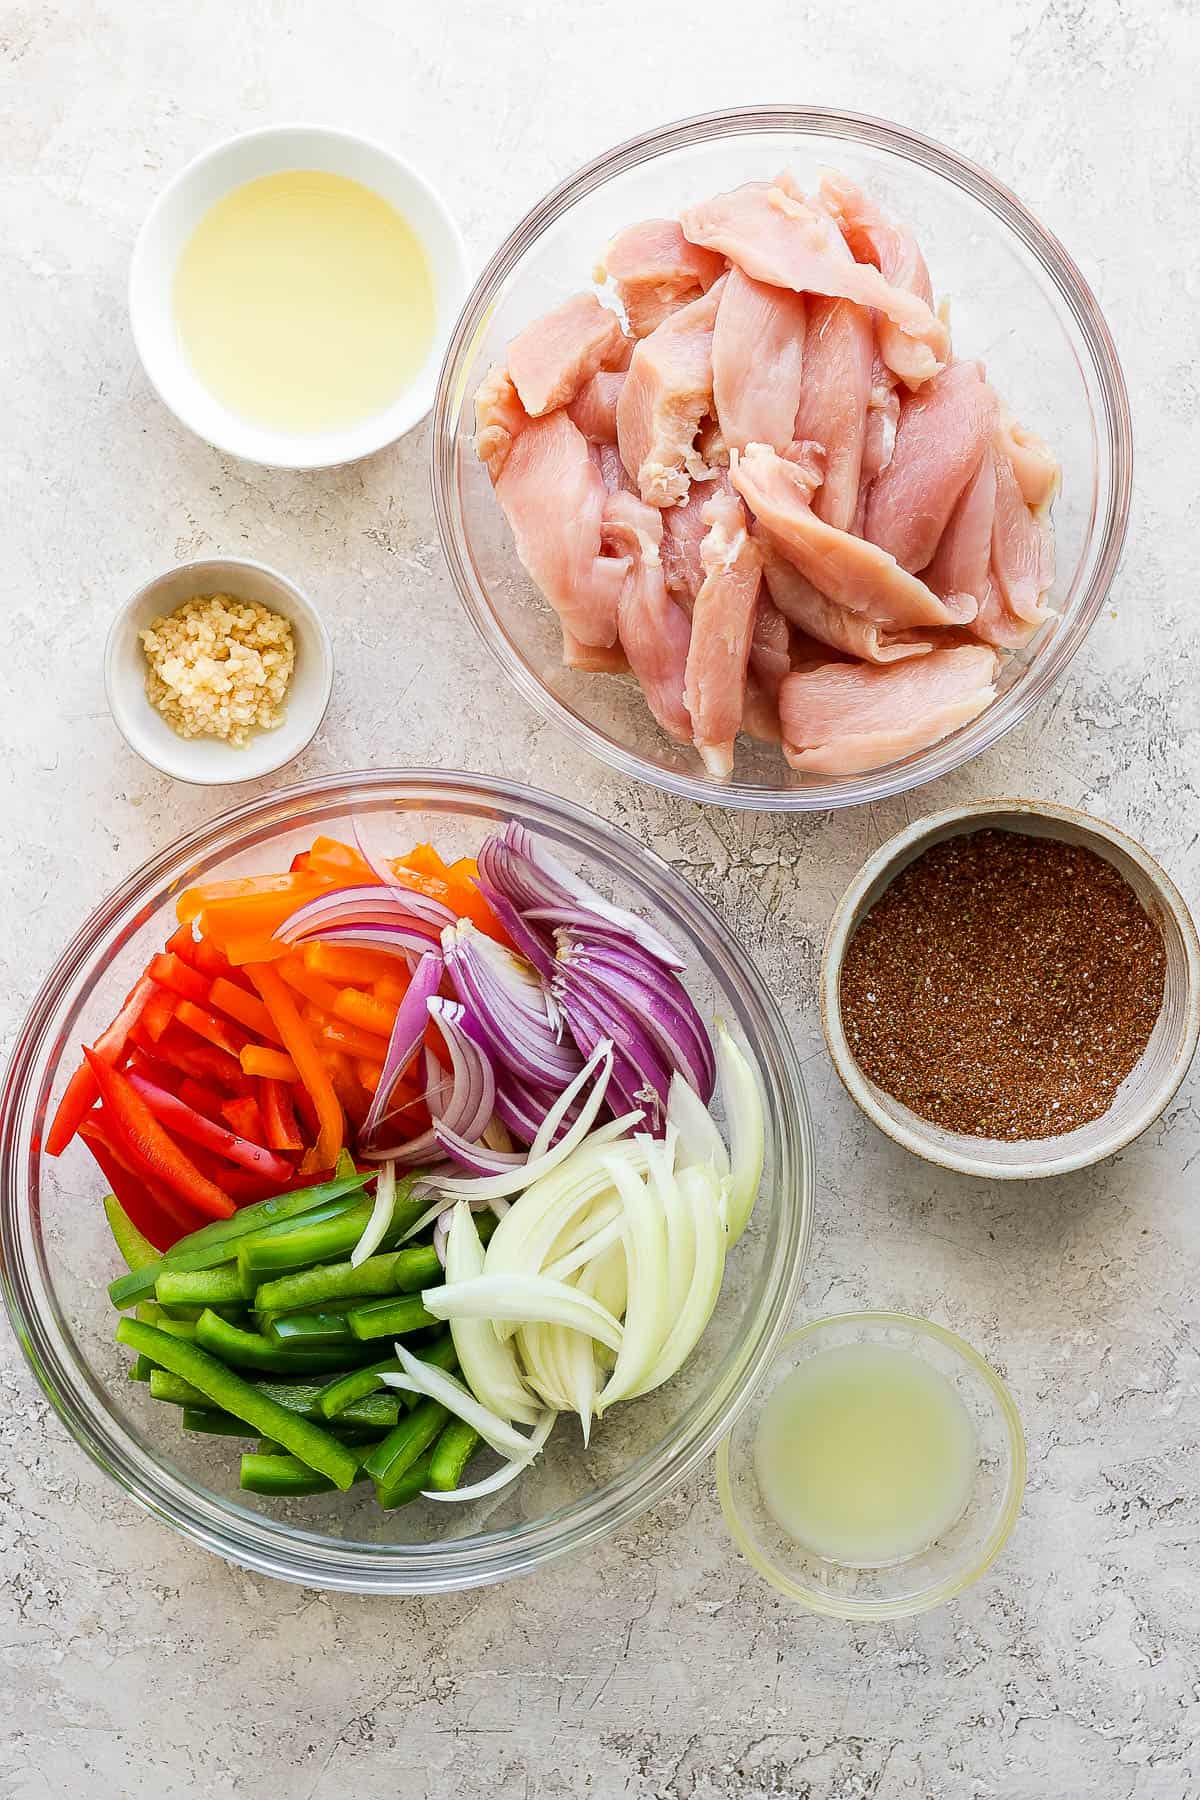 Ingredients for grilled chicken fajitas in separate bowls.